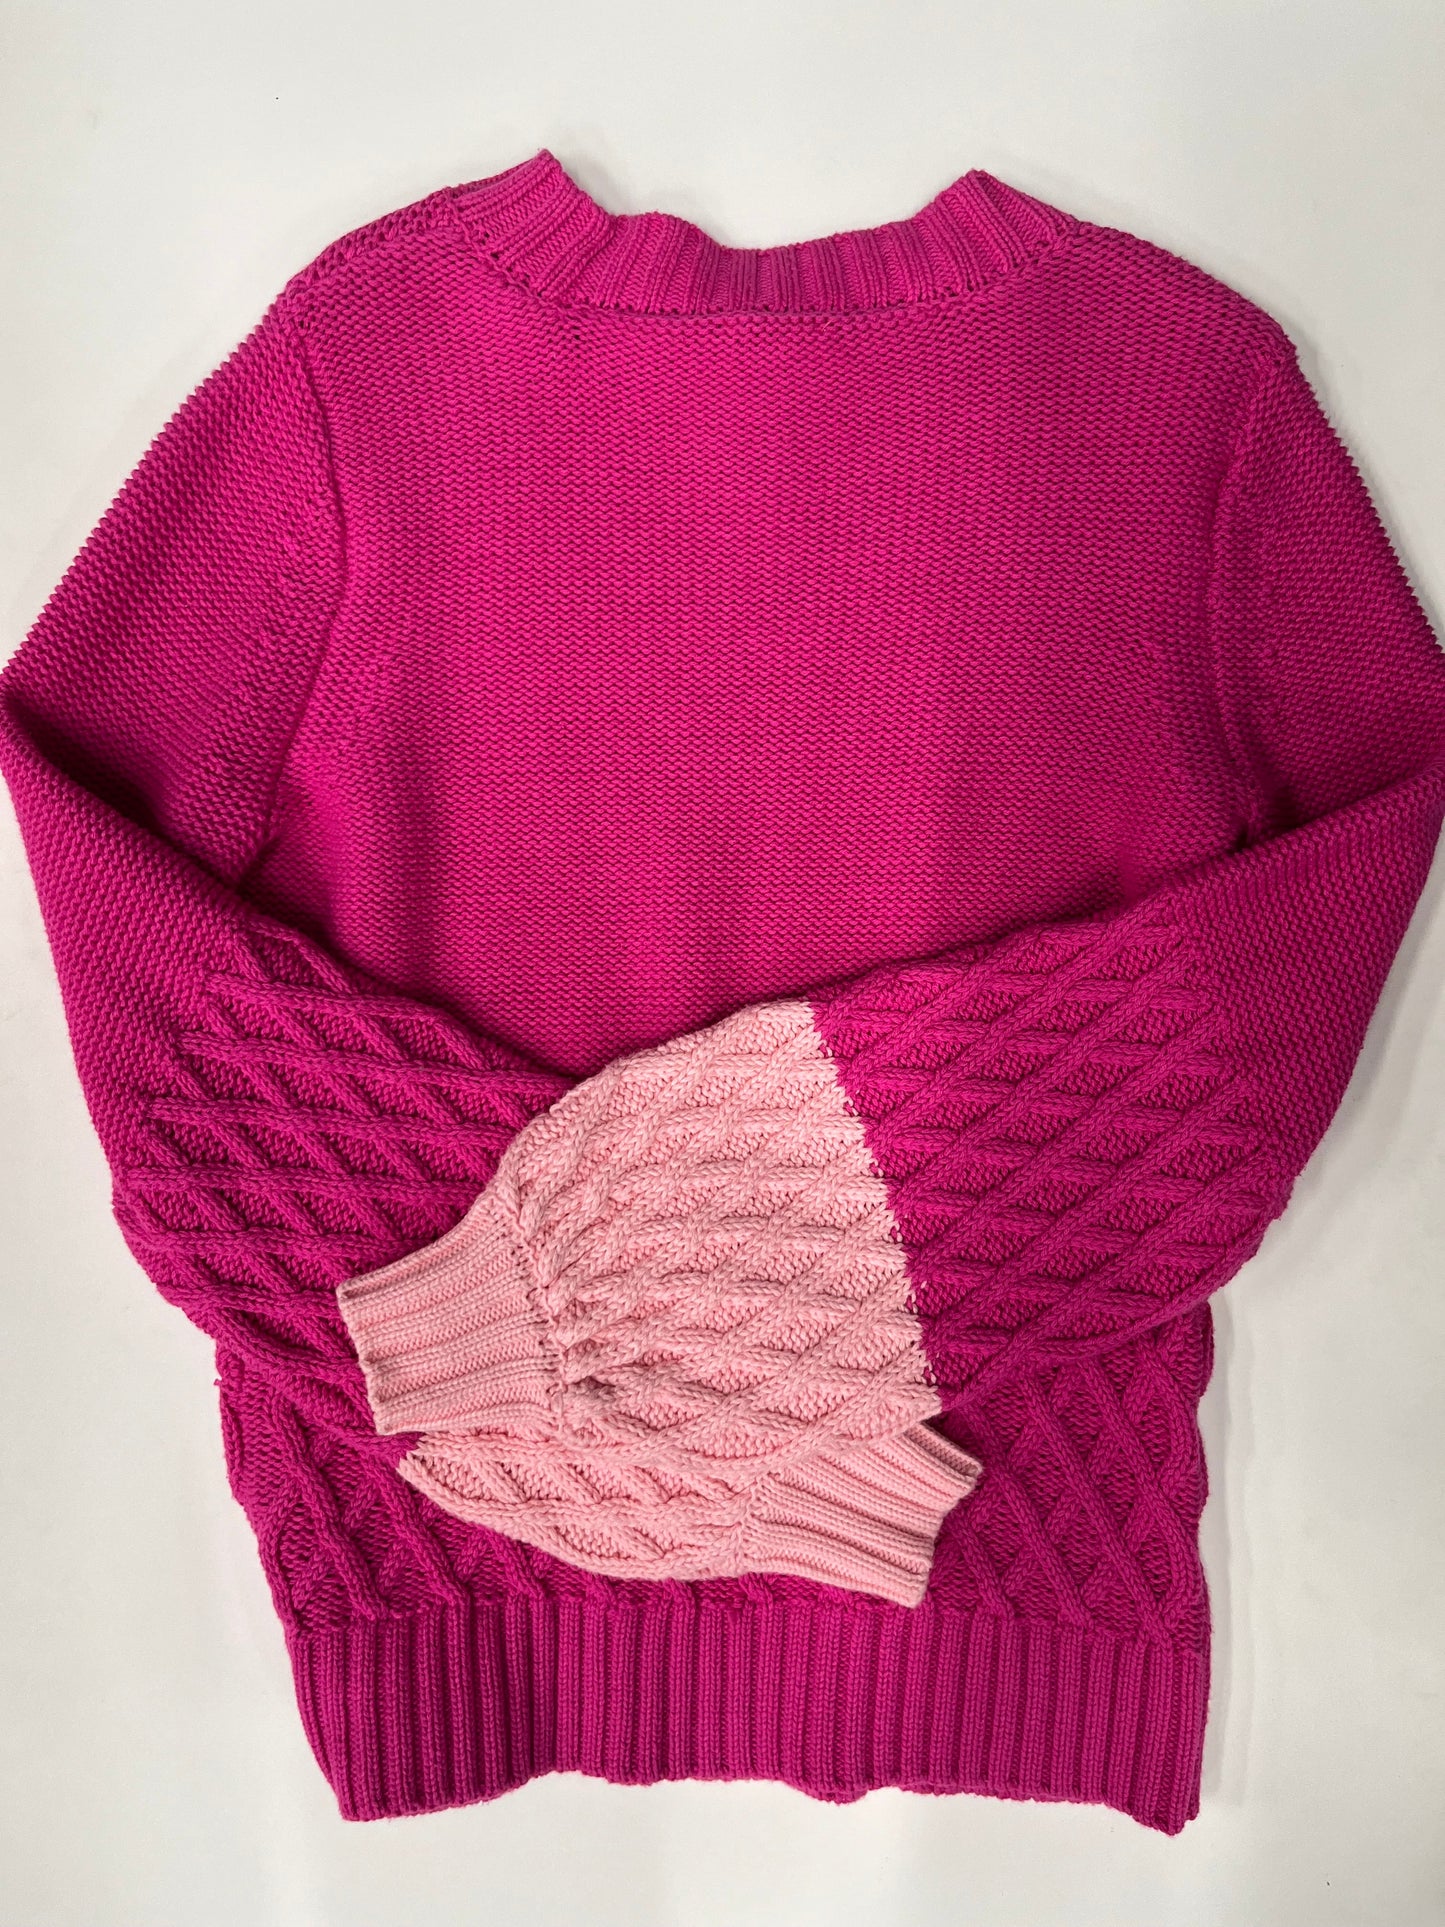 Sweater Heavyweight By Crown And Ivy NWT  Size: M